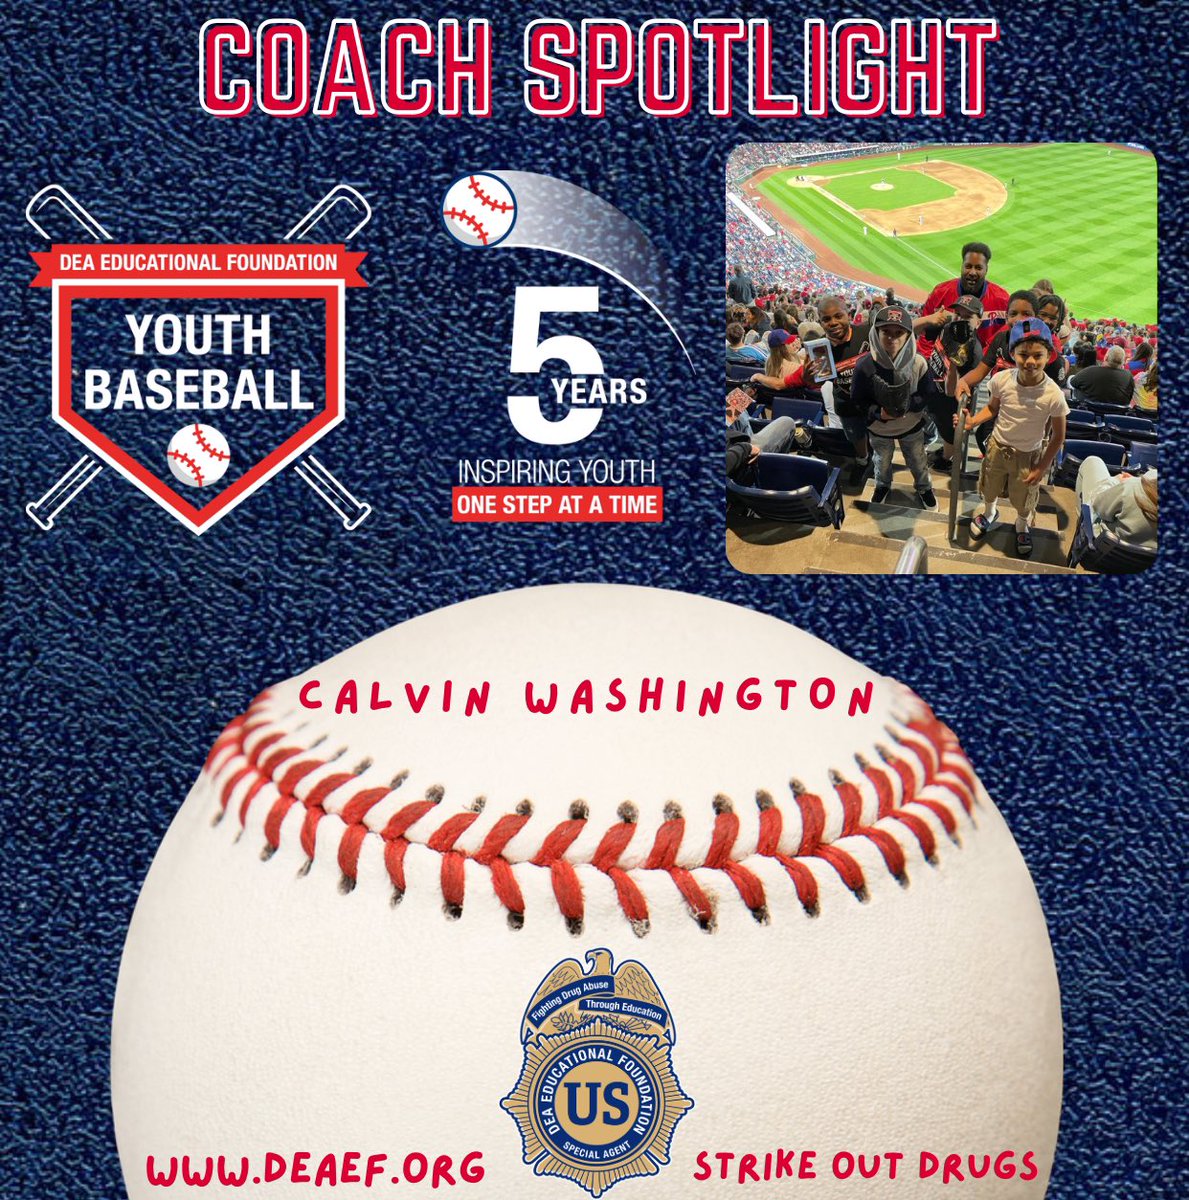 Day 2, we THANK our coaches & spotlight Coach Calvin. Calvin is currently our coach at 2 schools, Roberto Clemente MS & Bayard Taylor in Philly. Calvin has been key in building our YBP in the community. We are grateful to have him as a coach & mentor! igfn.us/f/4rzz/n